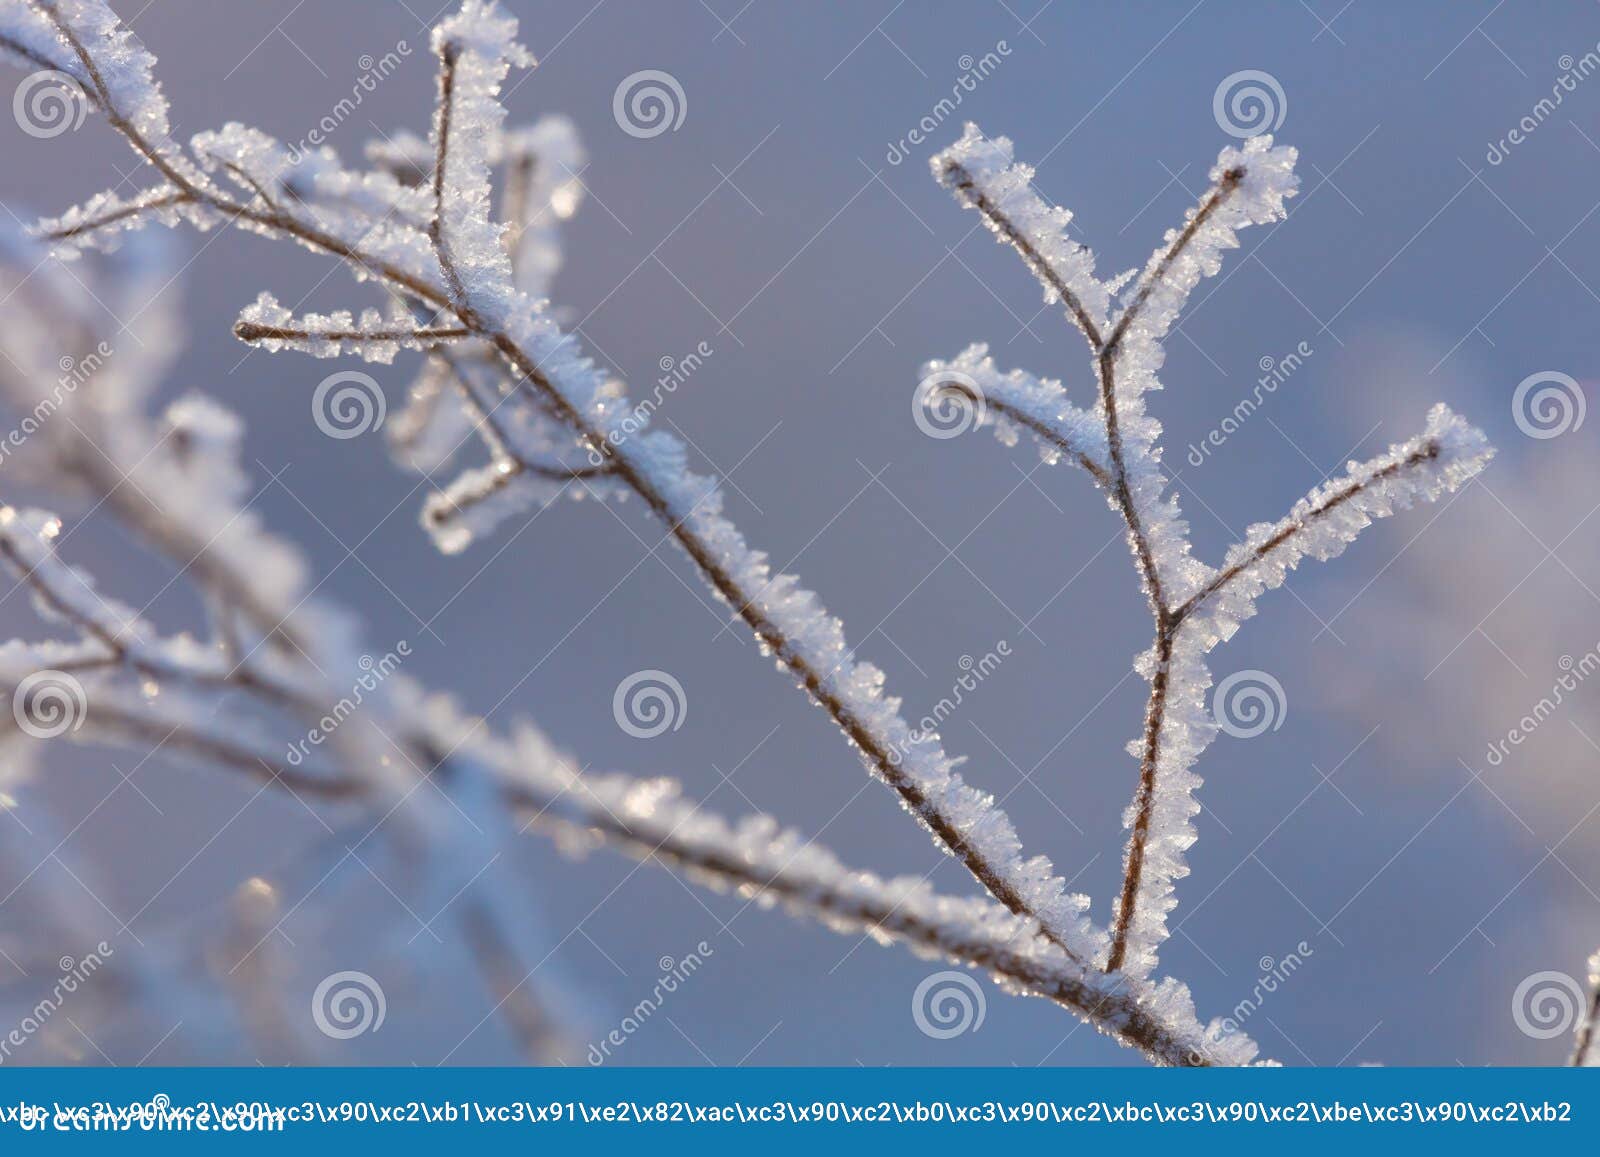 beautiful winter background with the frozen flowers and plants. a natural pattern on plants